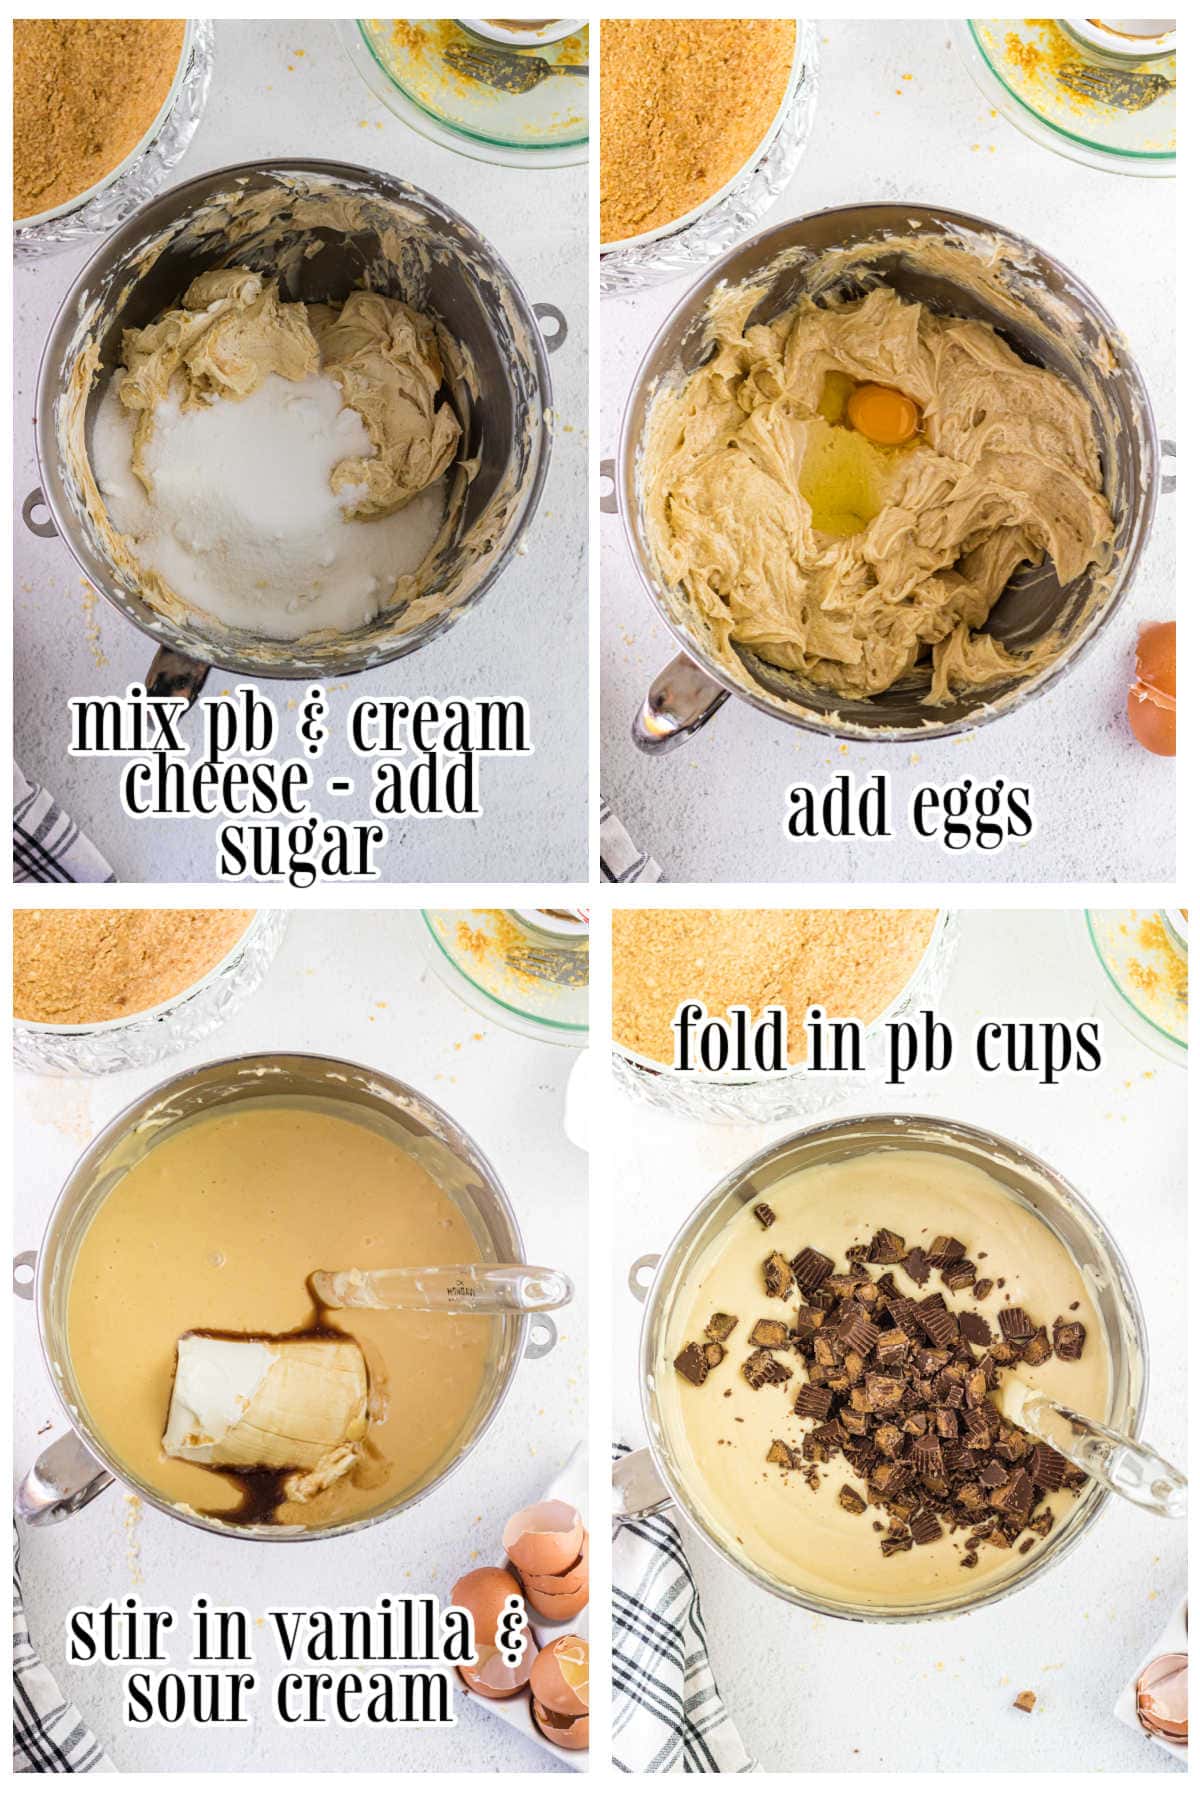 The four steps to making the cheesecake batter.